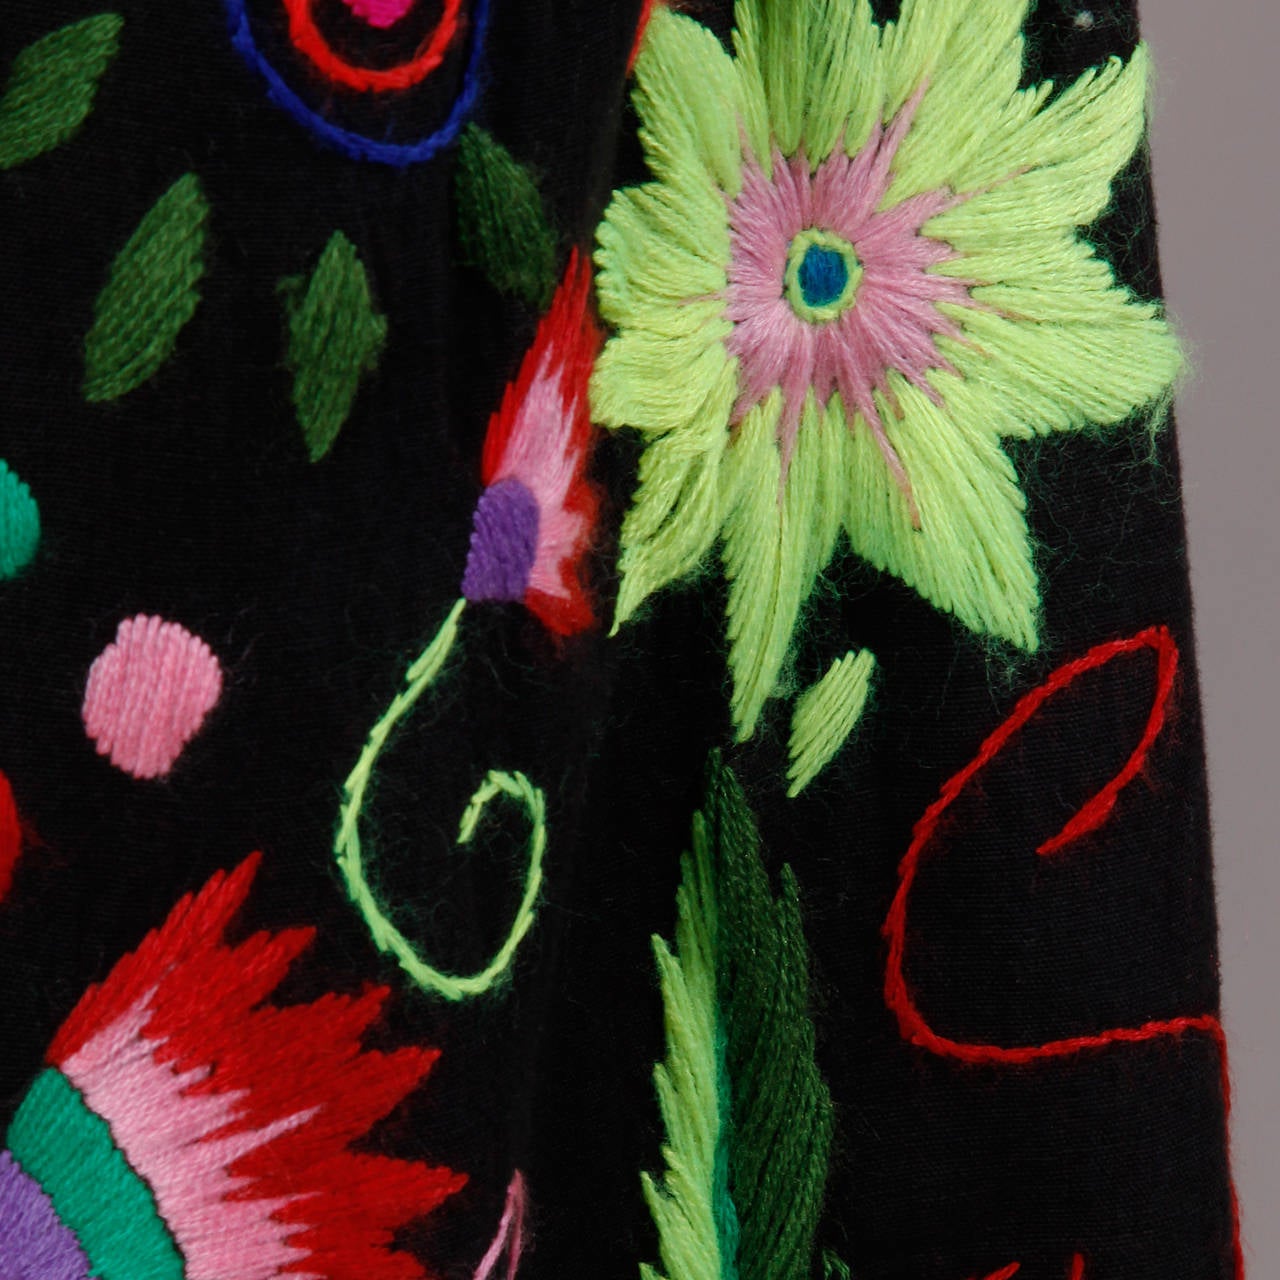 Intricately hand embroidered maxi skirt with allover folk art design. Completely hand done!

Details:

Unlined
Side Metal Zip Closure
Marked Size: Not Marked
Estimated Size: Small
Color: Black/ Bright and Pastel Multicolored
Fabric: